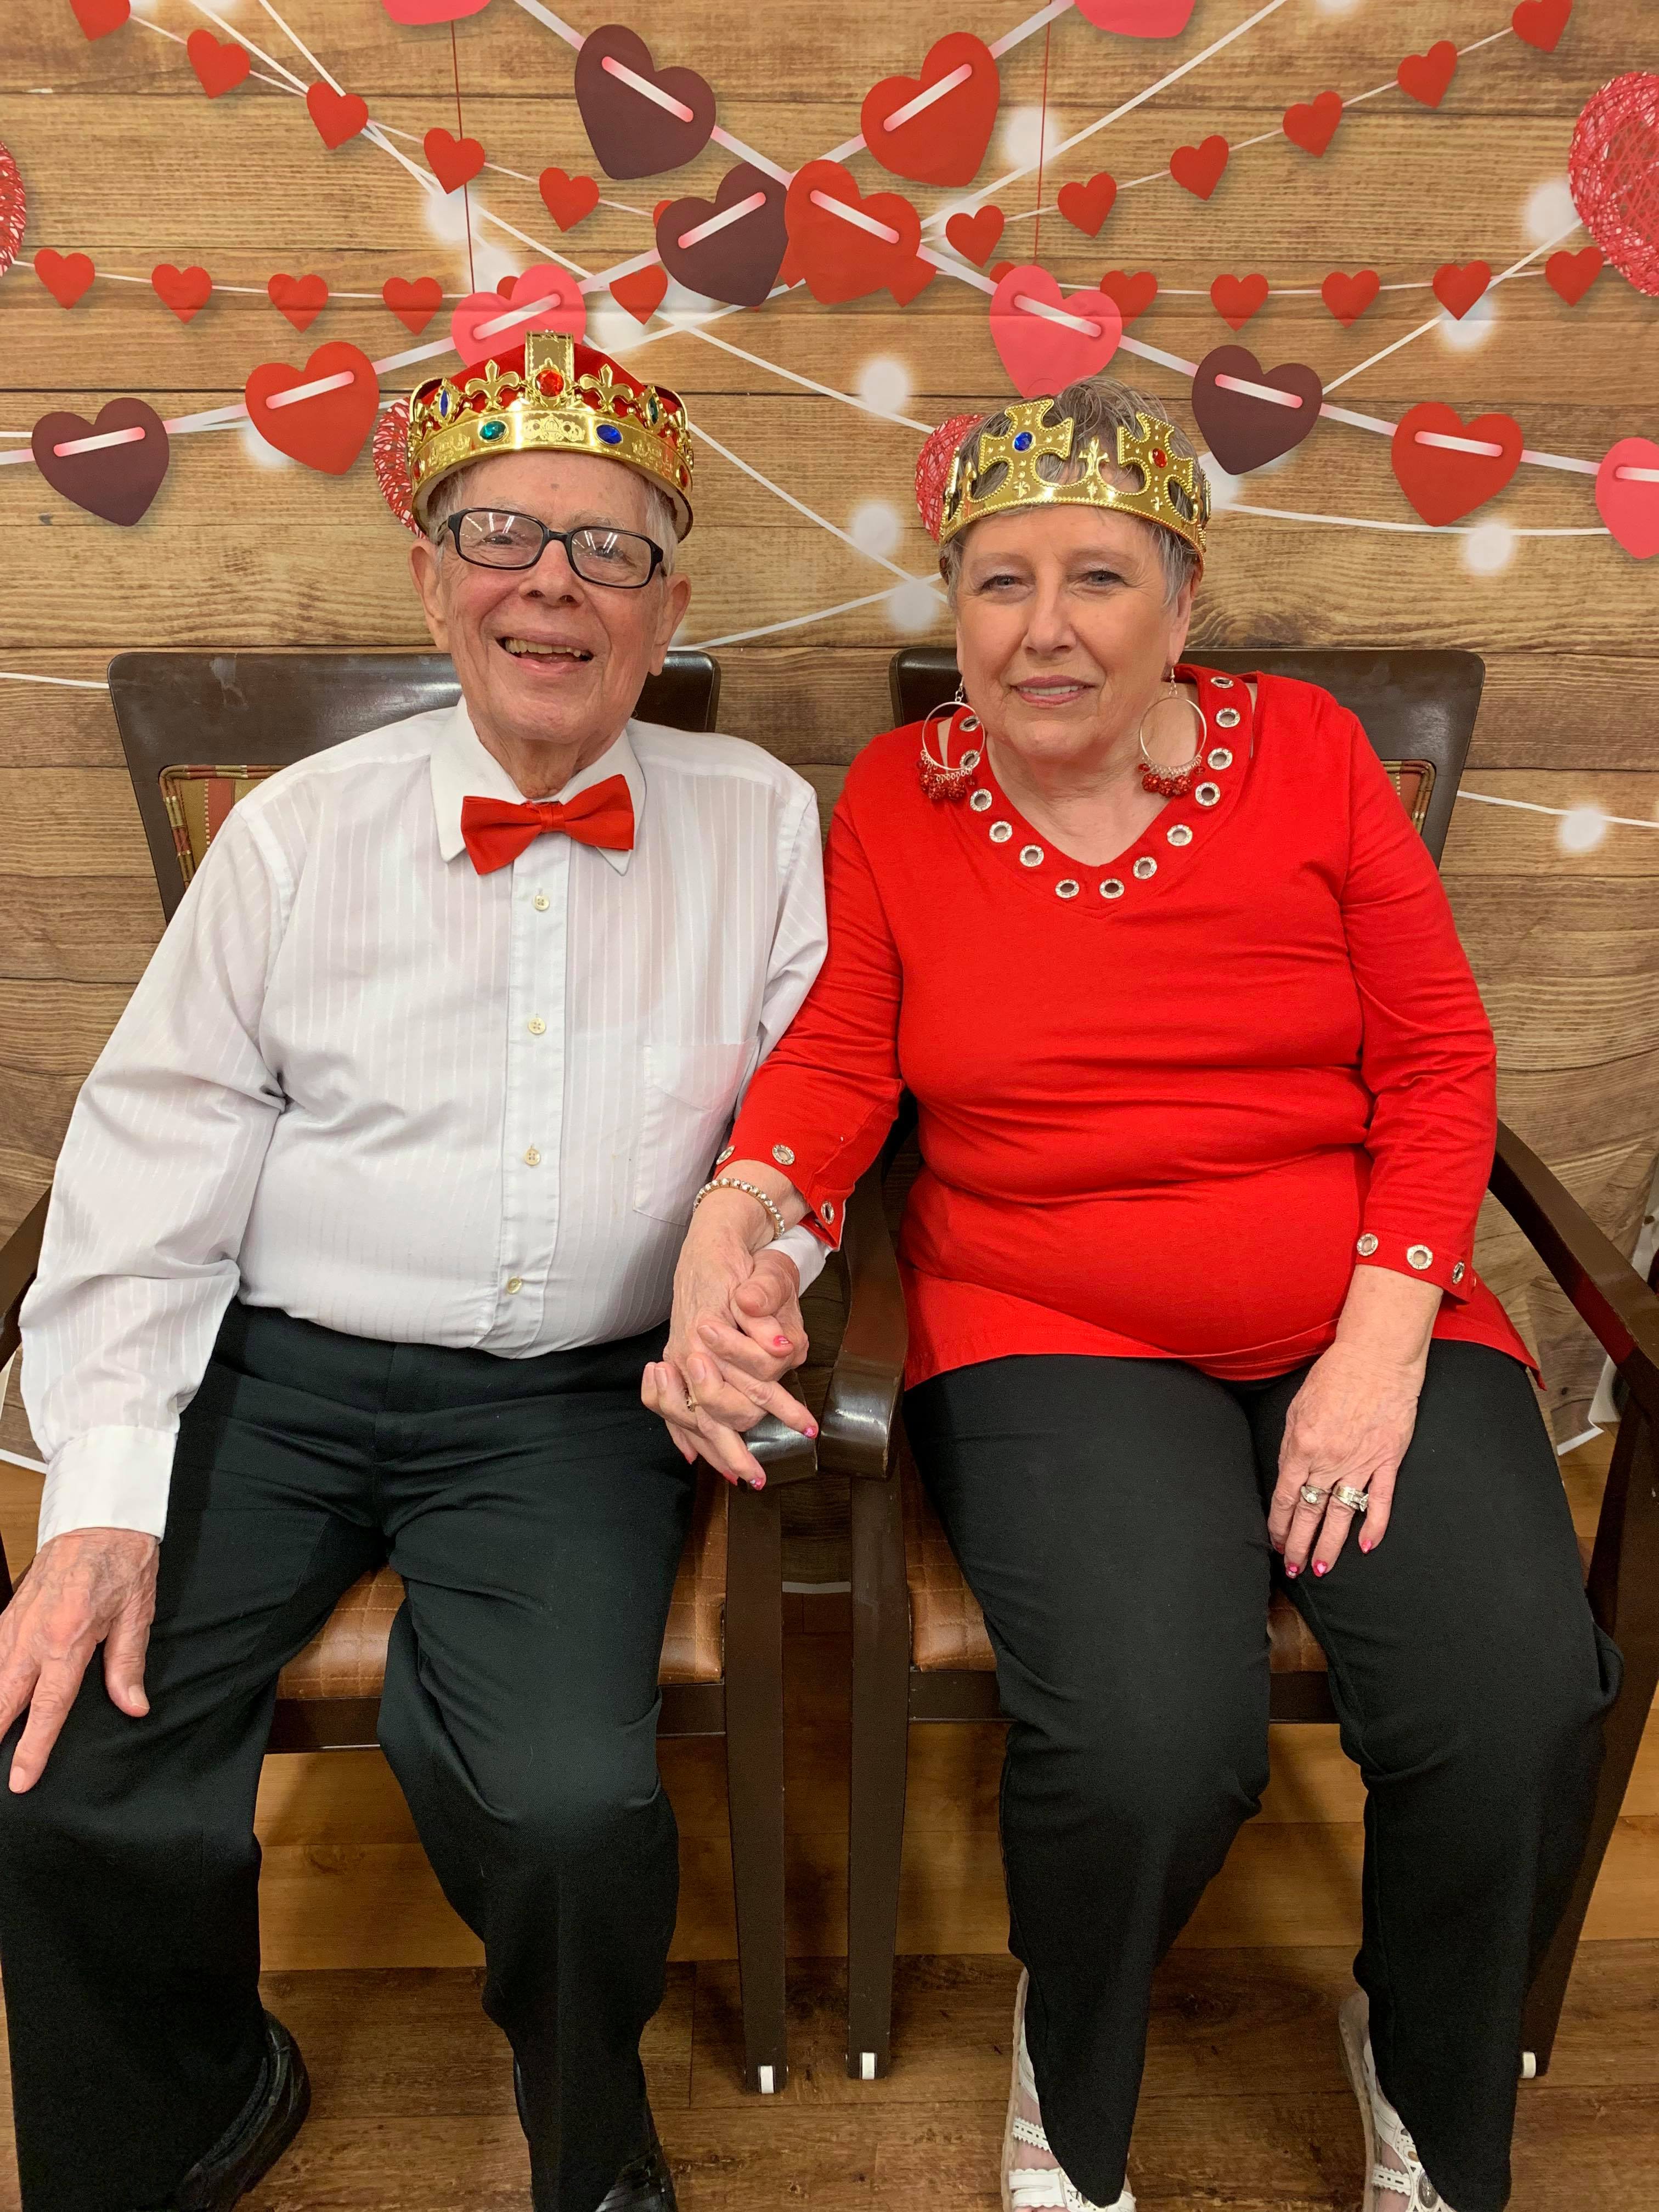 Robert & Louise Reynolds Named 2019 King and Queen at Wesley House Assisted Living Valentine’s Banquet